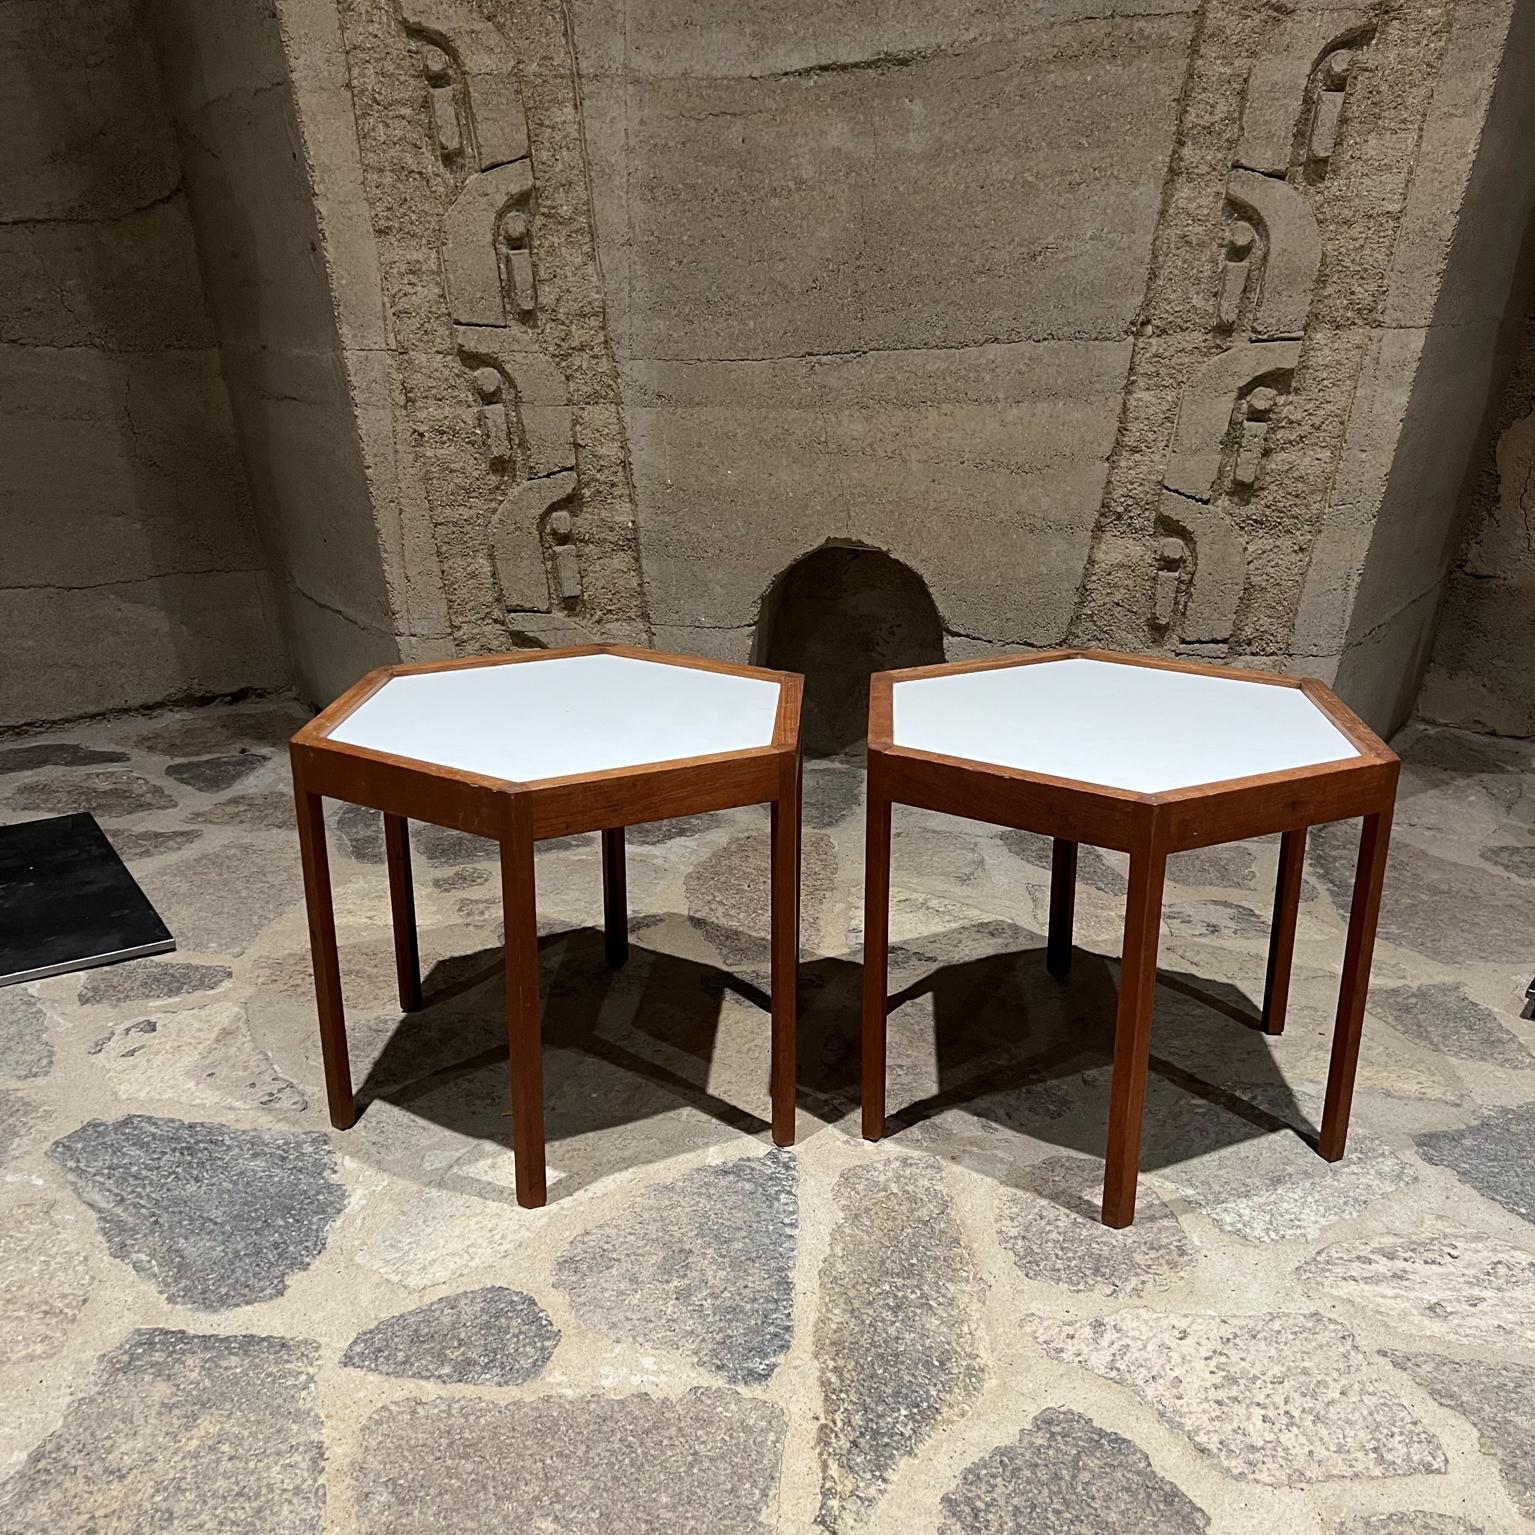 Side Tables by Hans Andersen. Made in Denmark circa 1960s. 
Solid Teak and white Formica Hexagonal Tables
Stamped MADE IN DENMARK
14.5 tall x 19.25 diameter 16.75 x 16.75
Preowned vintage overall good condition. Recently oiled.
Expect light